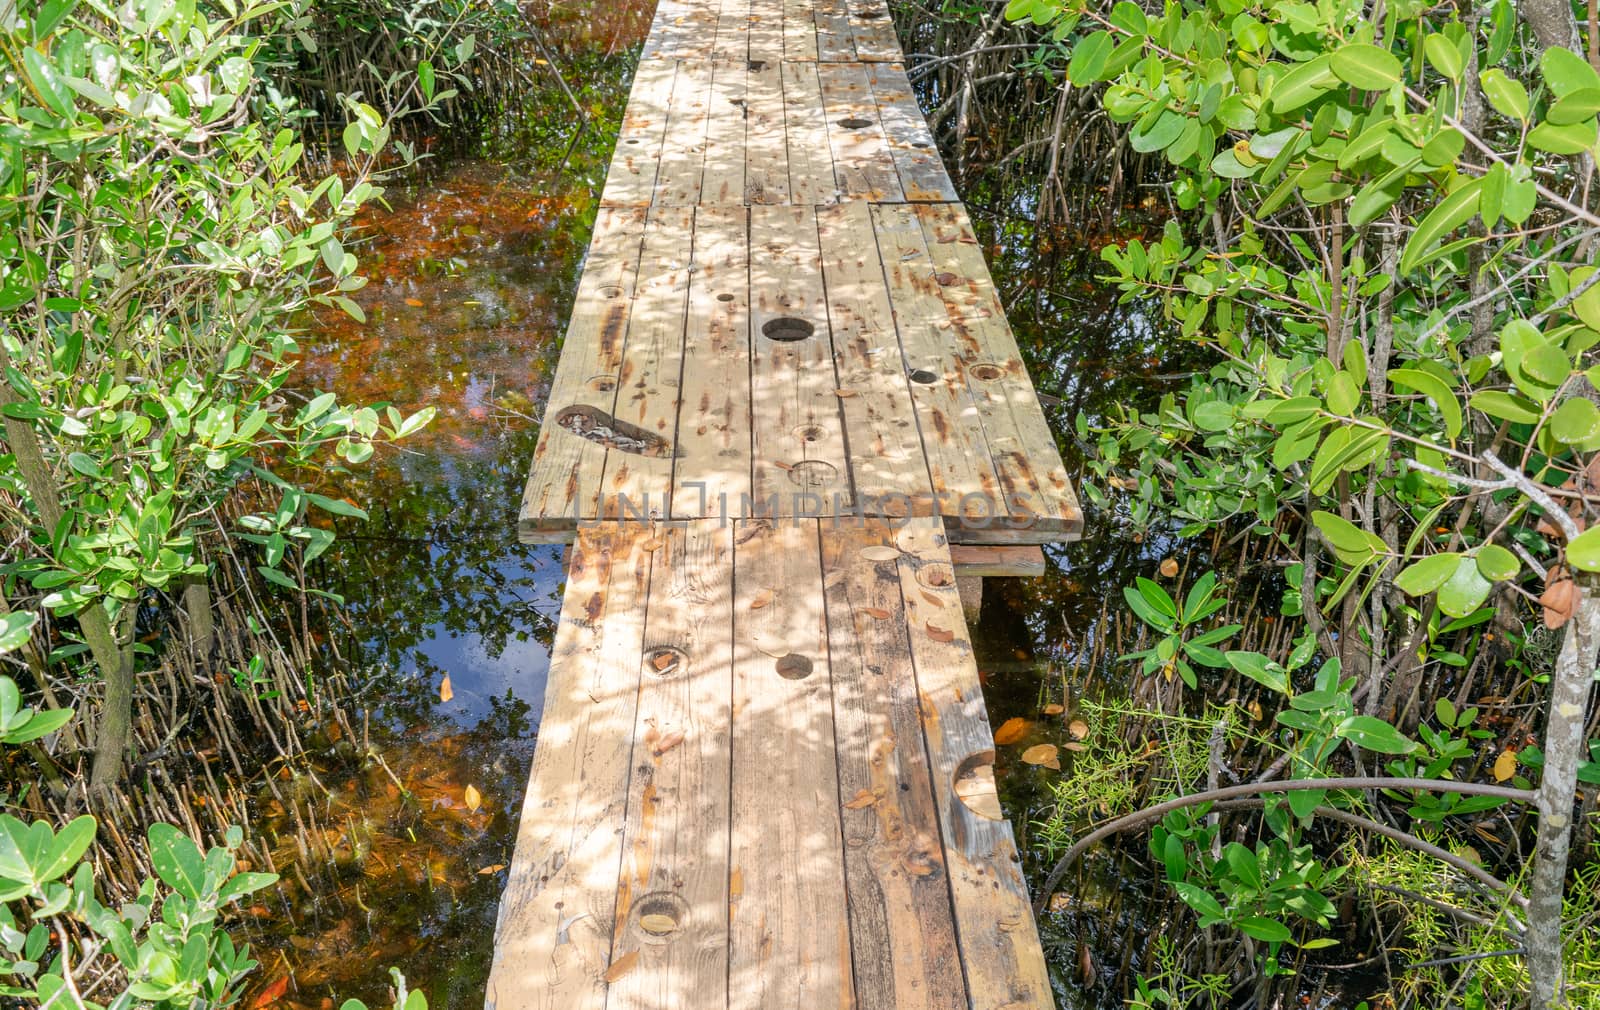 Bridge made of wood and undergrowth on the sides by Tonhio